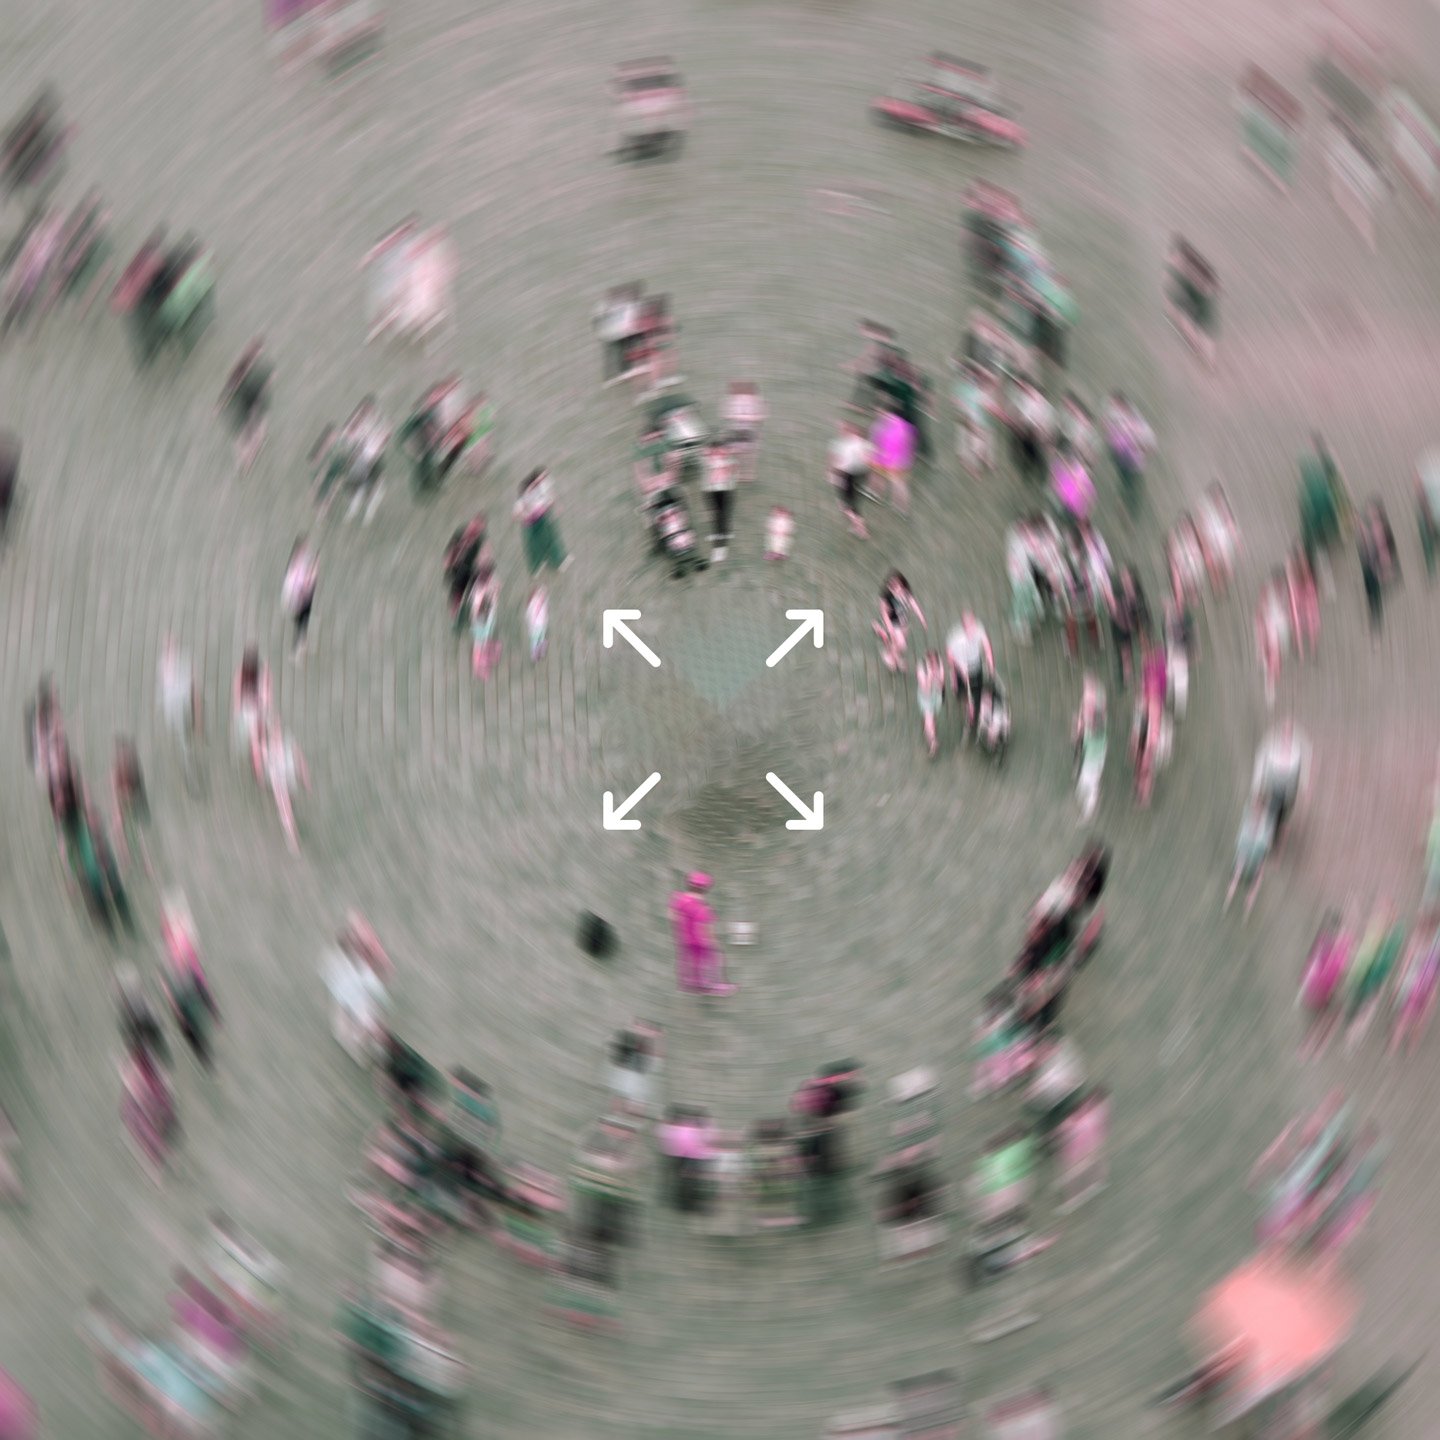 A distorted picture of people walking in a circular direction. The image is blurred to give a sense of confusion and unease, similar to how cancer survivors may feel during the easing of lockdown and Covid-19. Arrows appear on the image pointing in all directions.